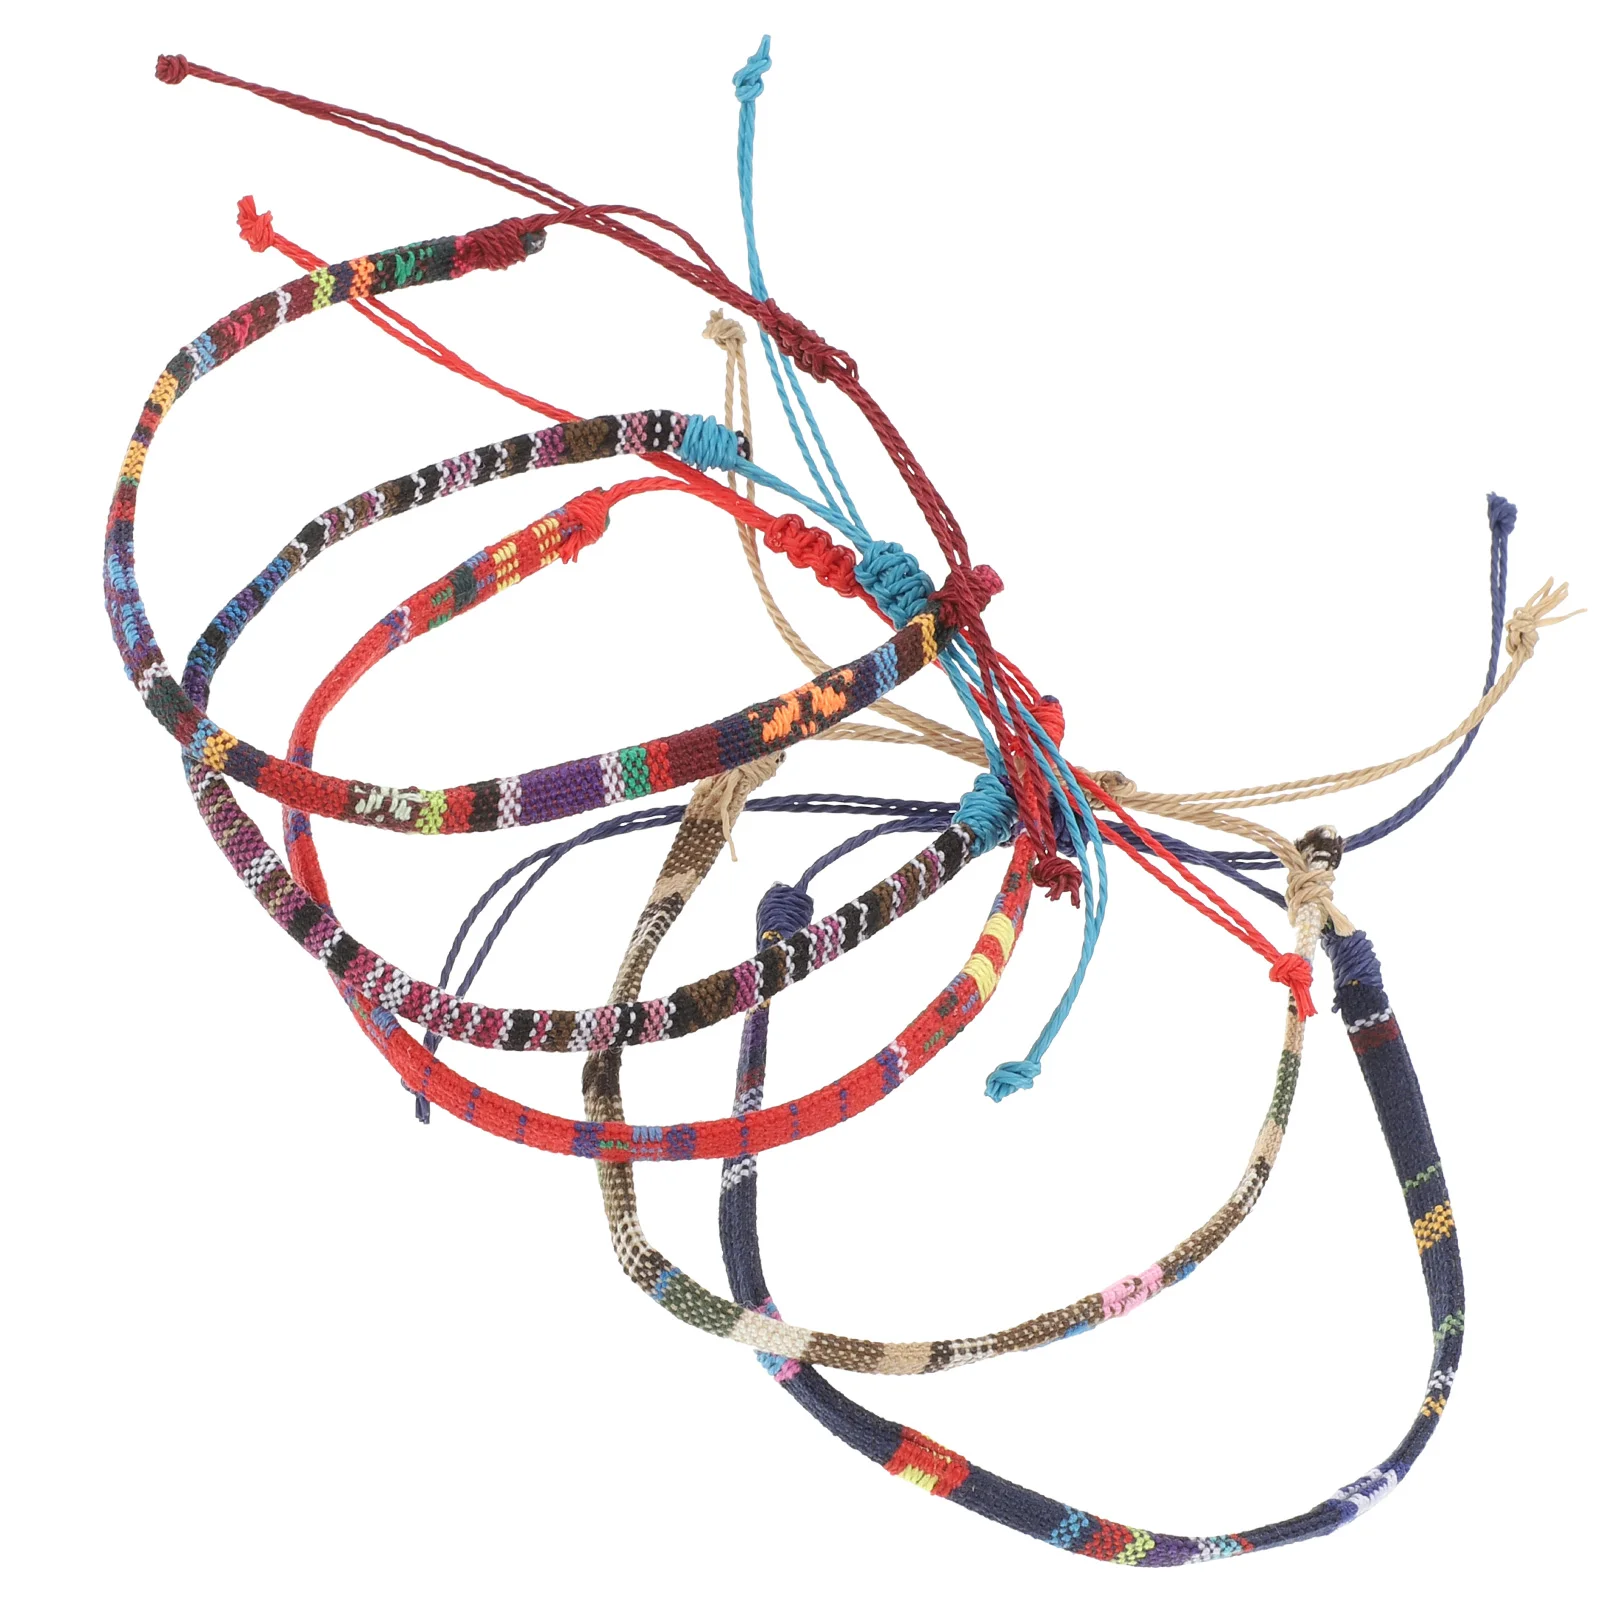 

5 Pcs Promise Bracelet Couples Women Woven Anklet Thread Wrist Jewelry Touch Bracelets String Wristband Weave Colorful Rope